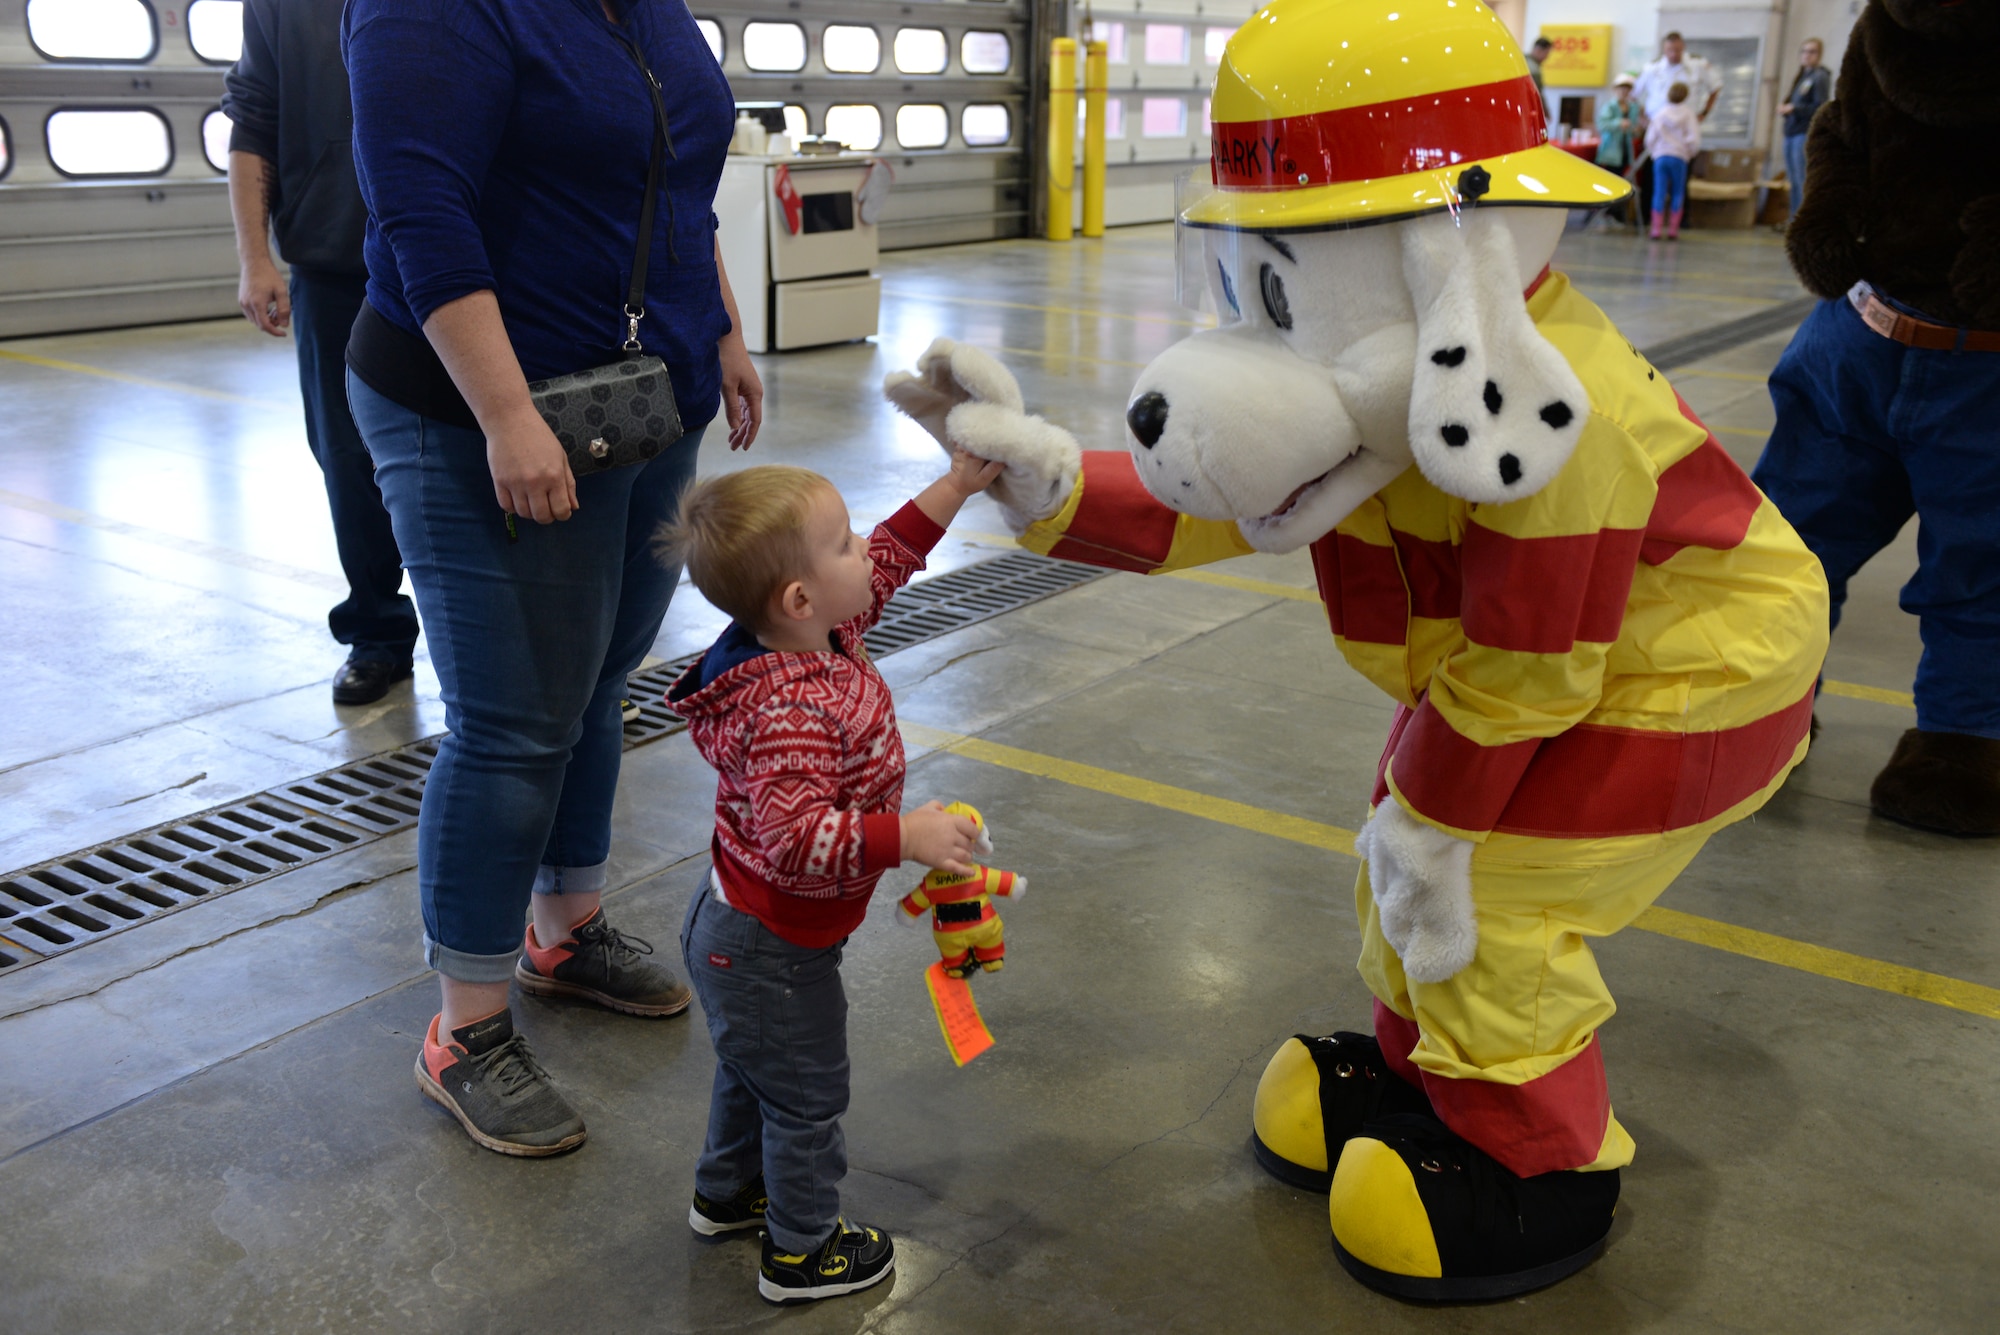 Sparky the Dalmatian high-fives a child during the Fire Prevention Week Open House event at the 28th Civil Engineer Squadron Fire Department at Ellsworth Air Force Base, S.D., Oct. 5, 2019. The Fire Department conducted an open house where children and families could interact with Sparky and learn fire safety. (U.S. Air Force photo by Airman Quentin K. Marx)